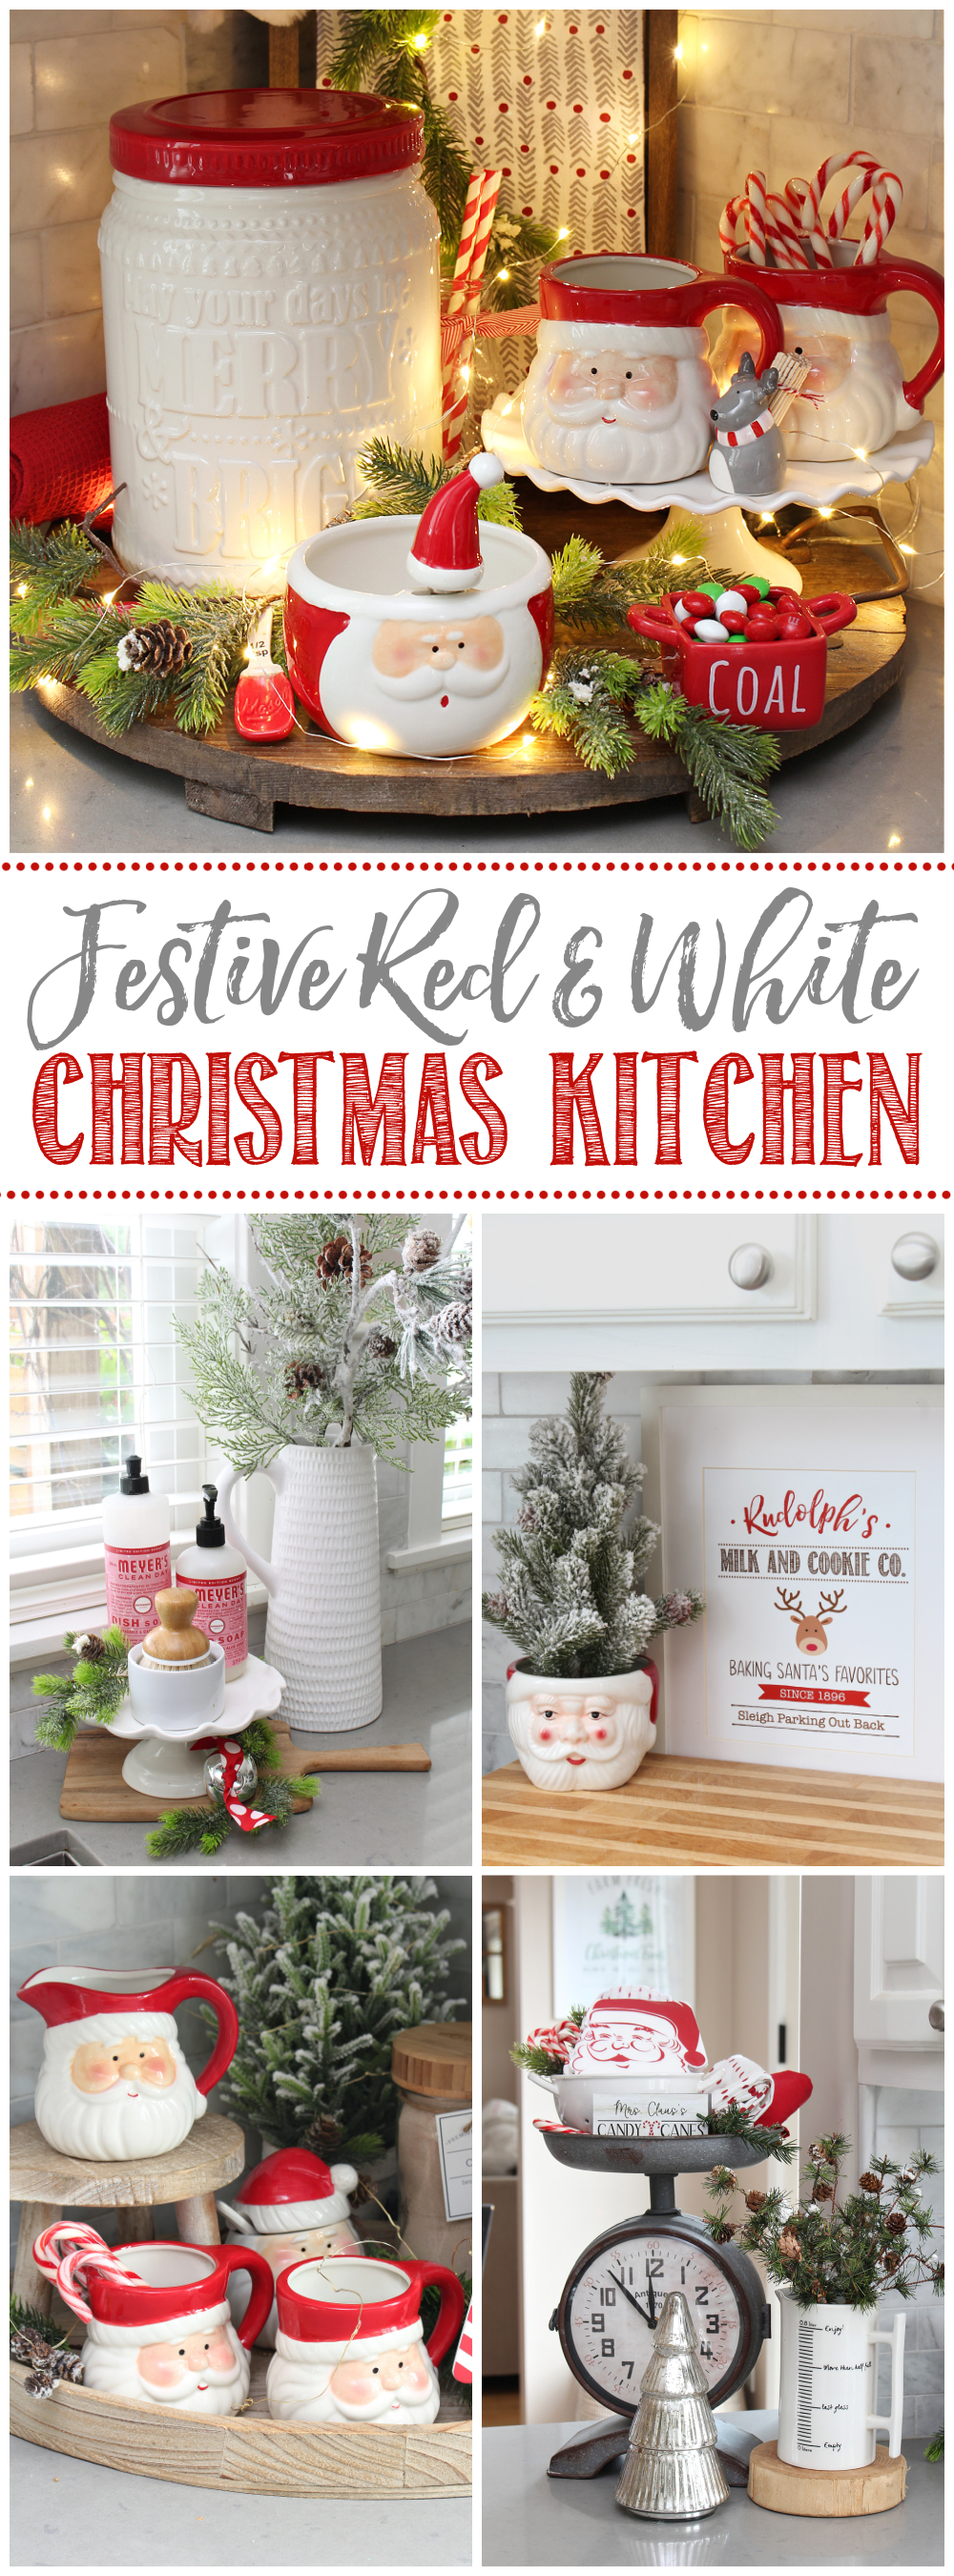 https://www.cleanandscentsible.com/wp-content/uploads/2021/12/Festive-Red-and-White-Christmas-Kitchen.png